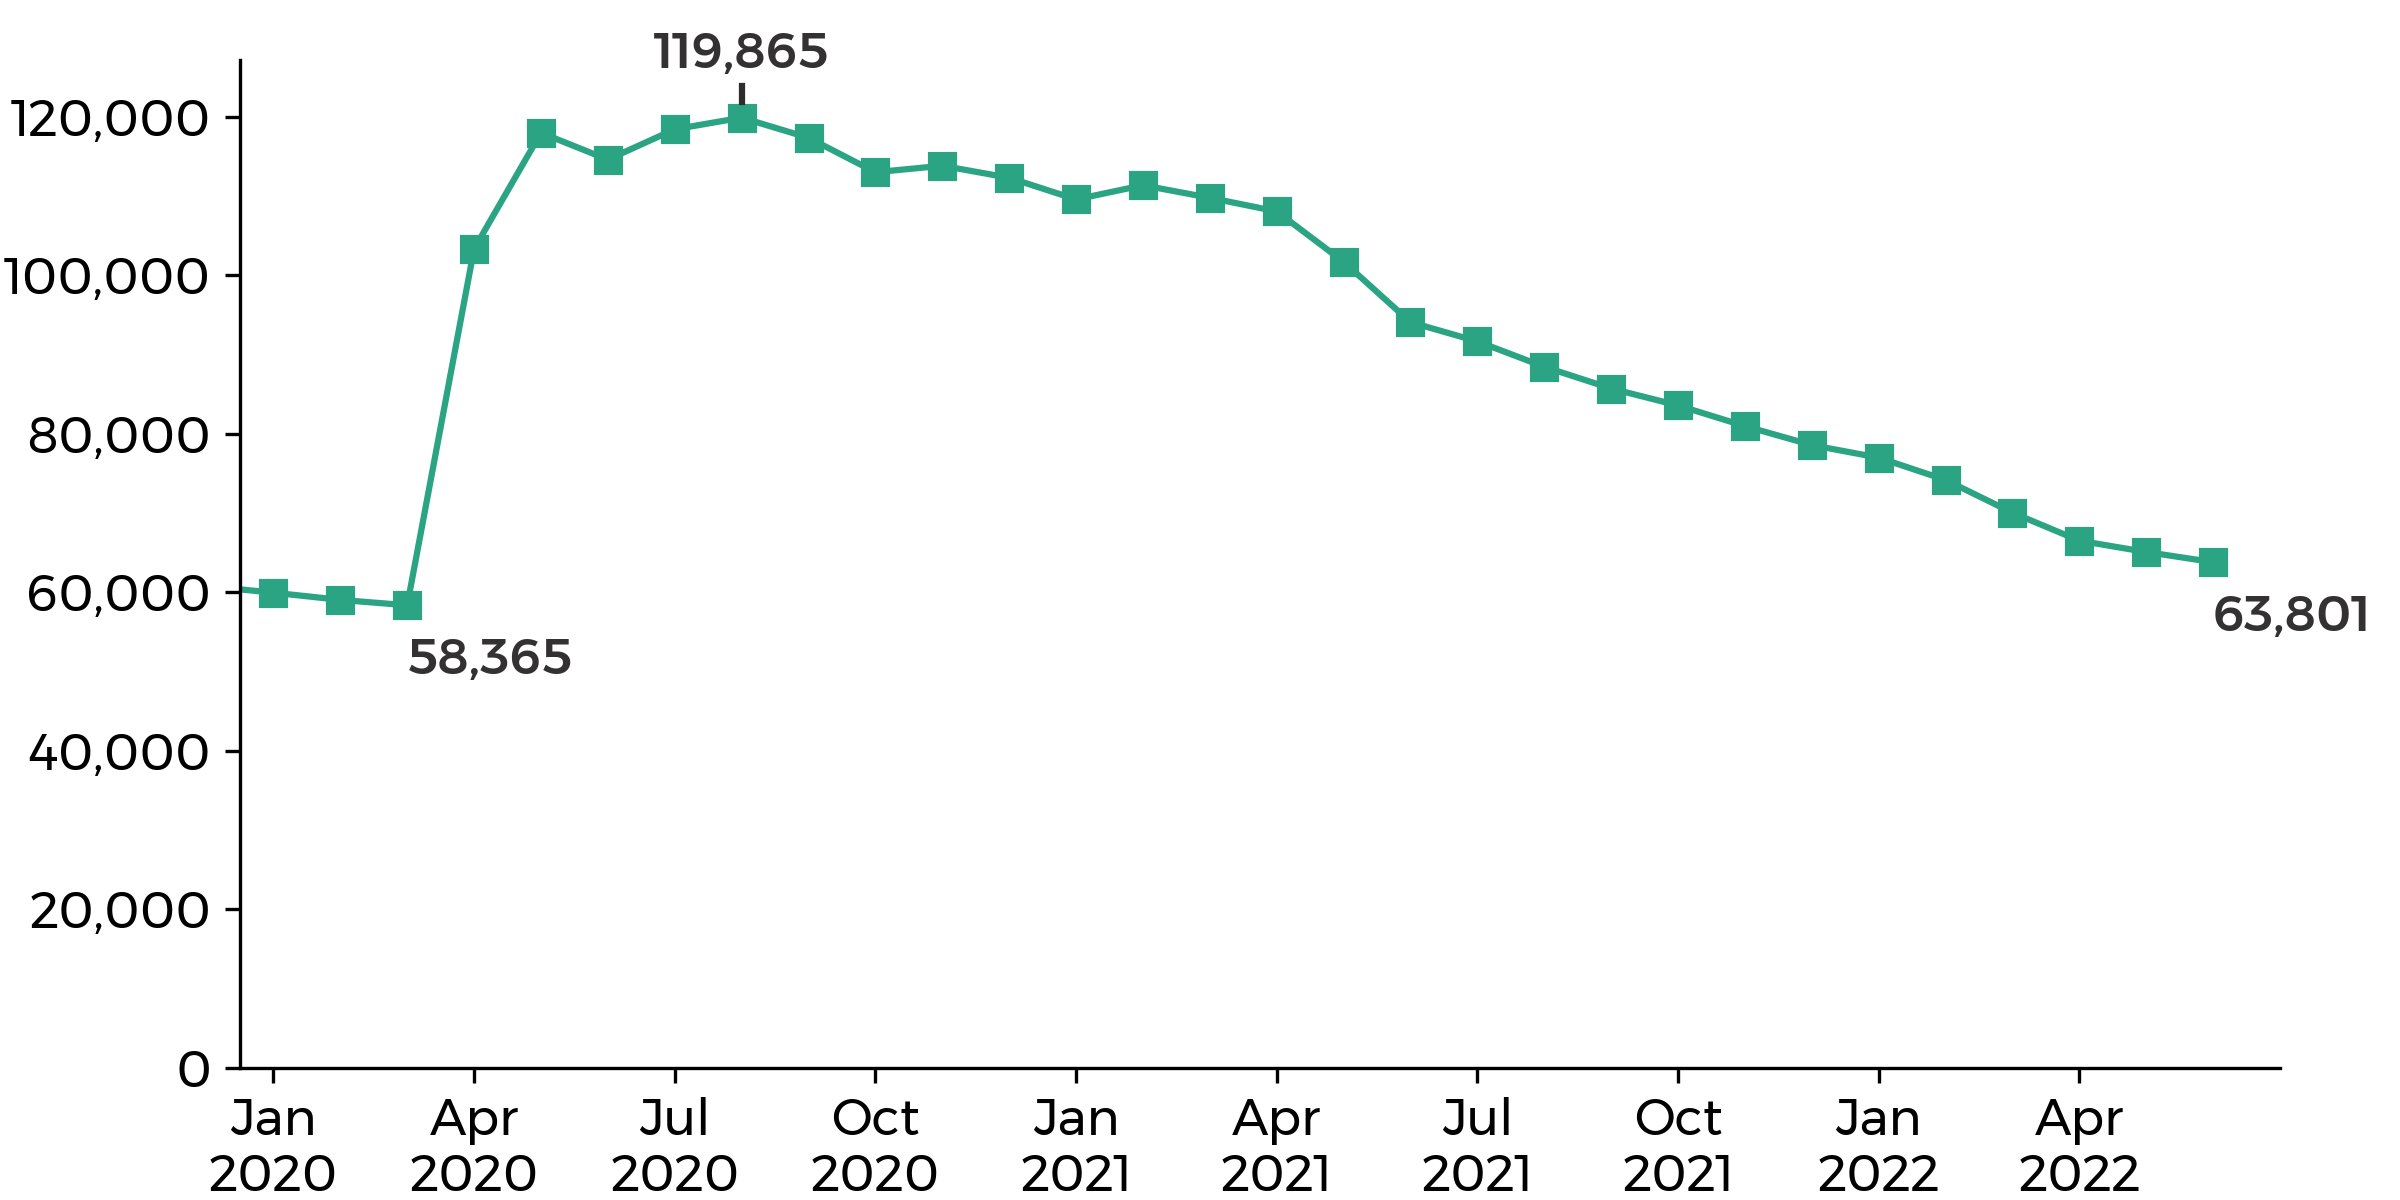 graph showing the Wales claimant count went up from 58,365 in March 2020 to 119,865 in August 2020, then decreasing to 63,801 in June 2022.